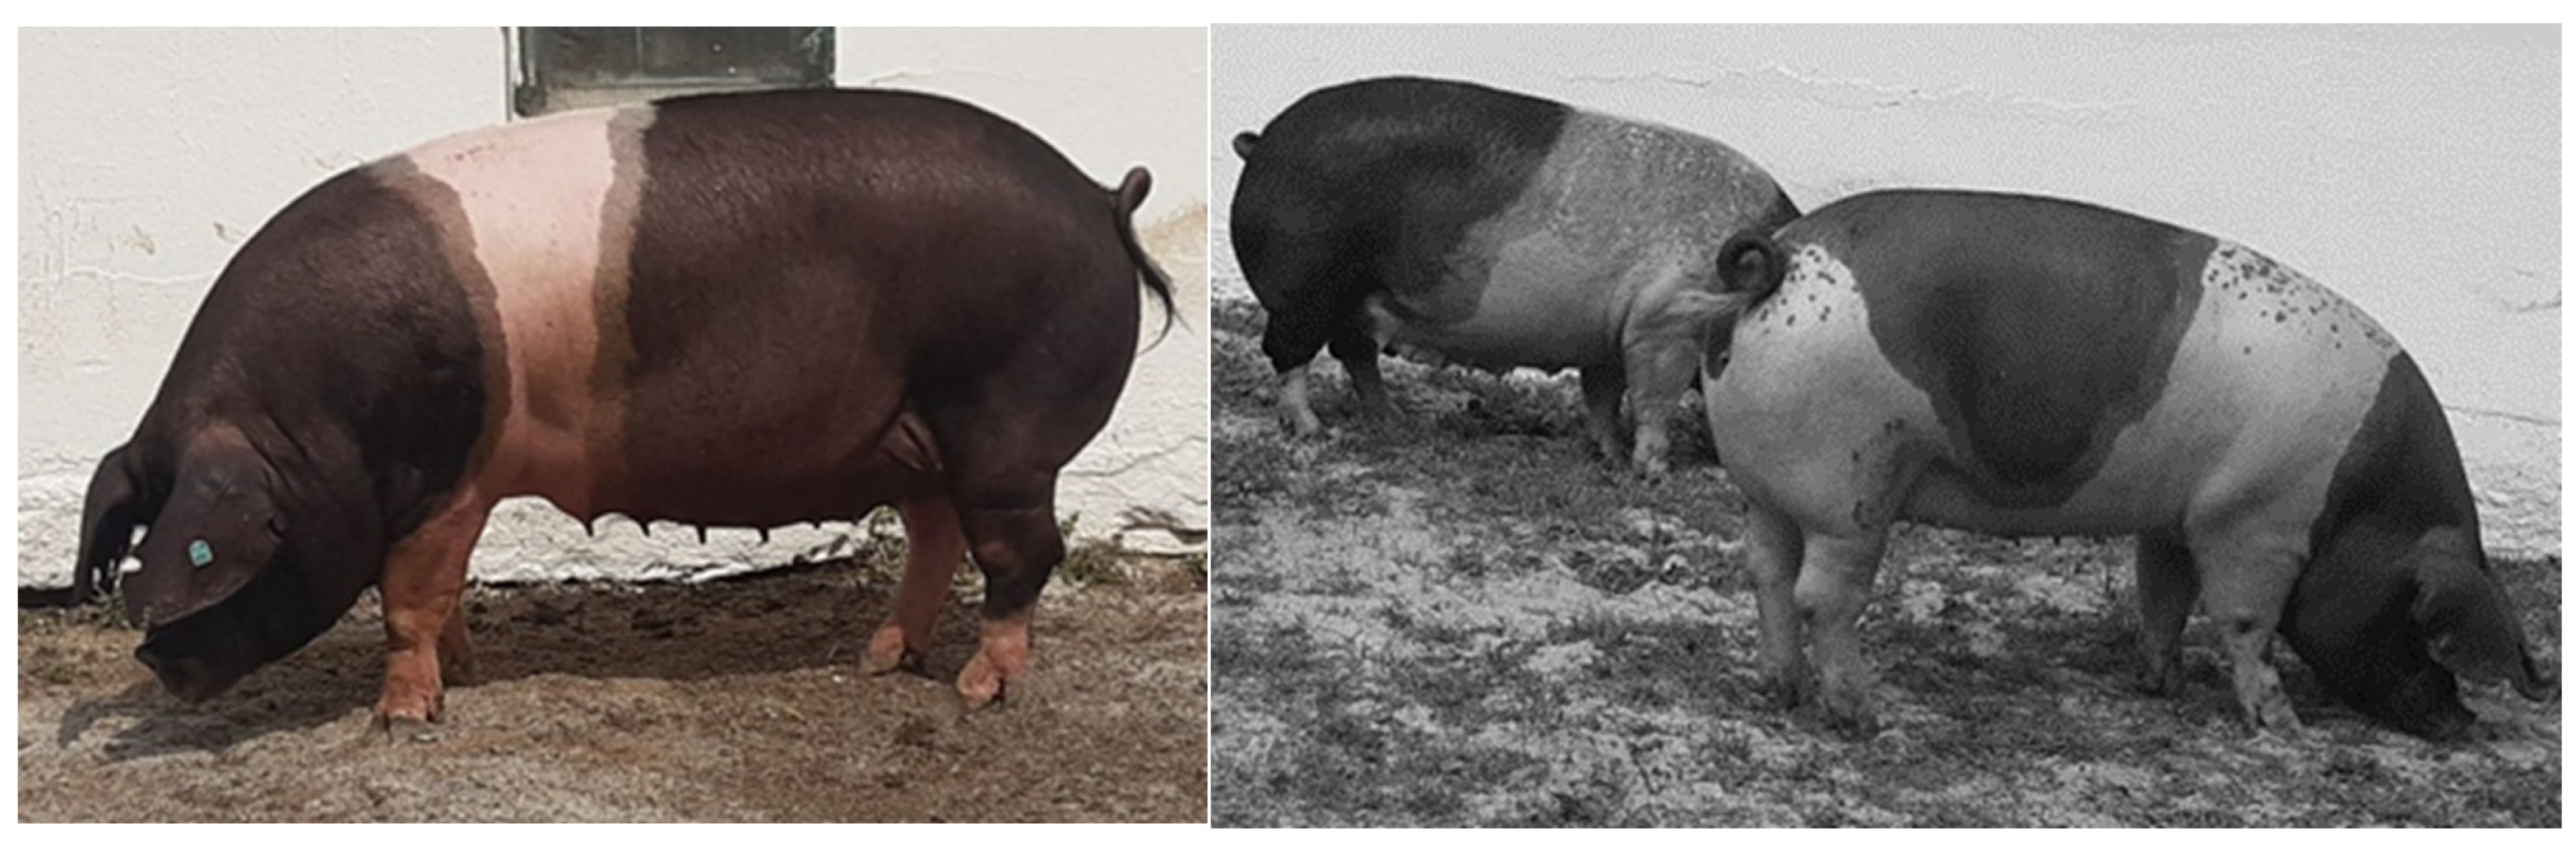 Genes | Free Full-Text | Assessment of the Genetic Diversity of a Local Pig  Breed Using Pedigree and SNP Data